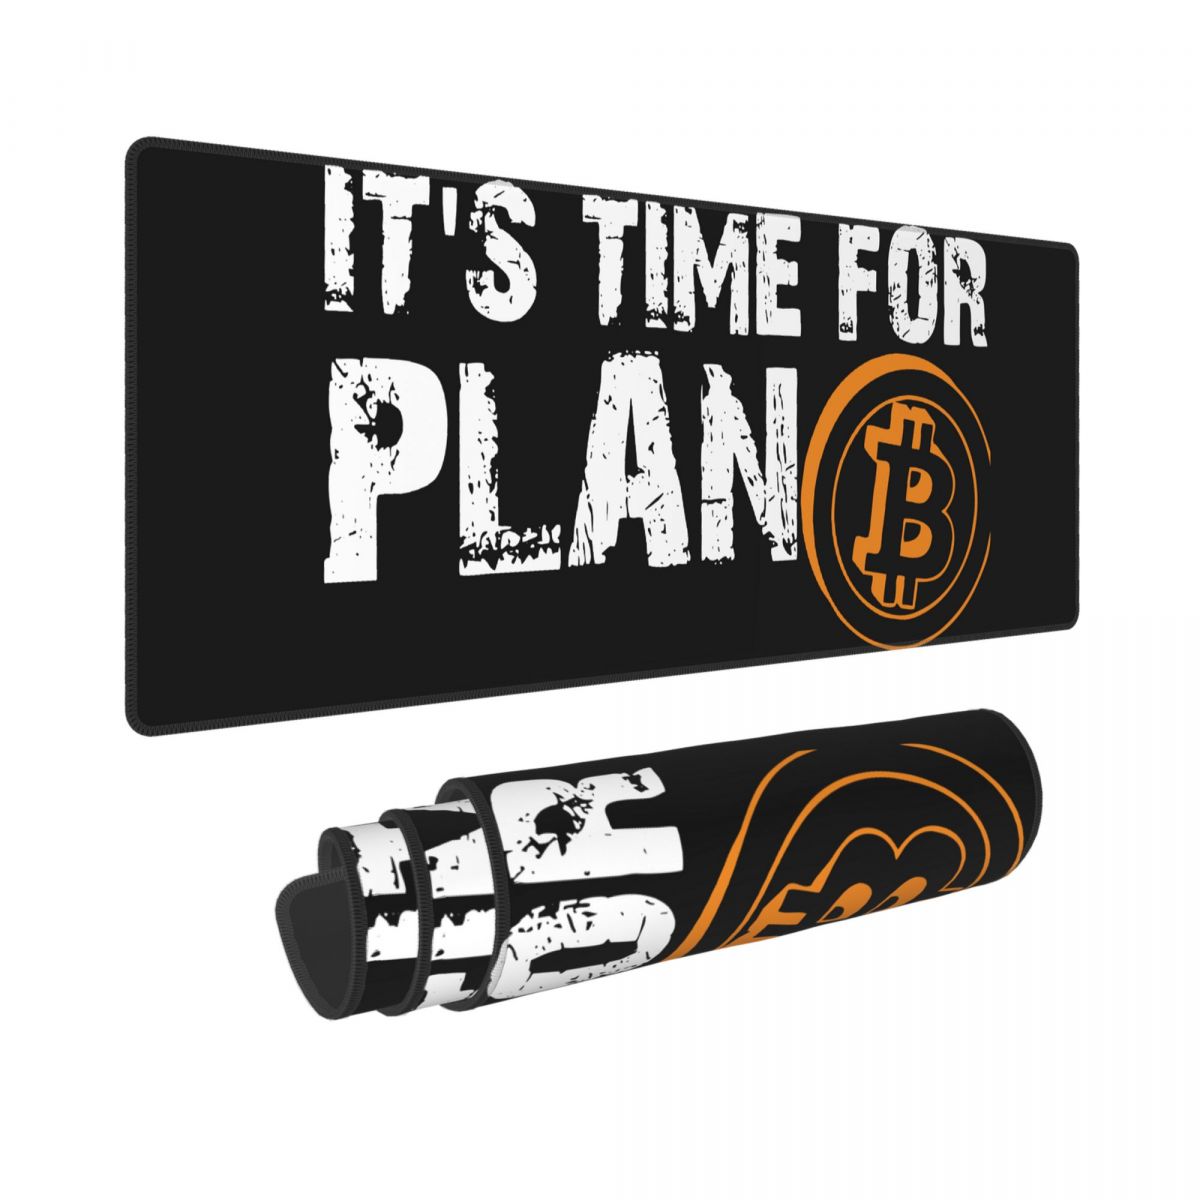 It's Time For Plan B Bitcoin  Long  Mouse Pad